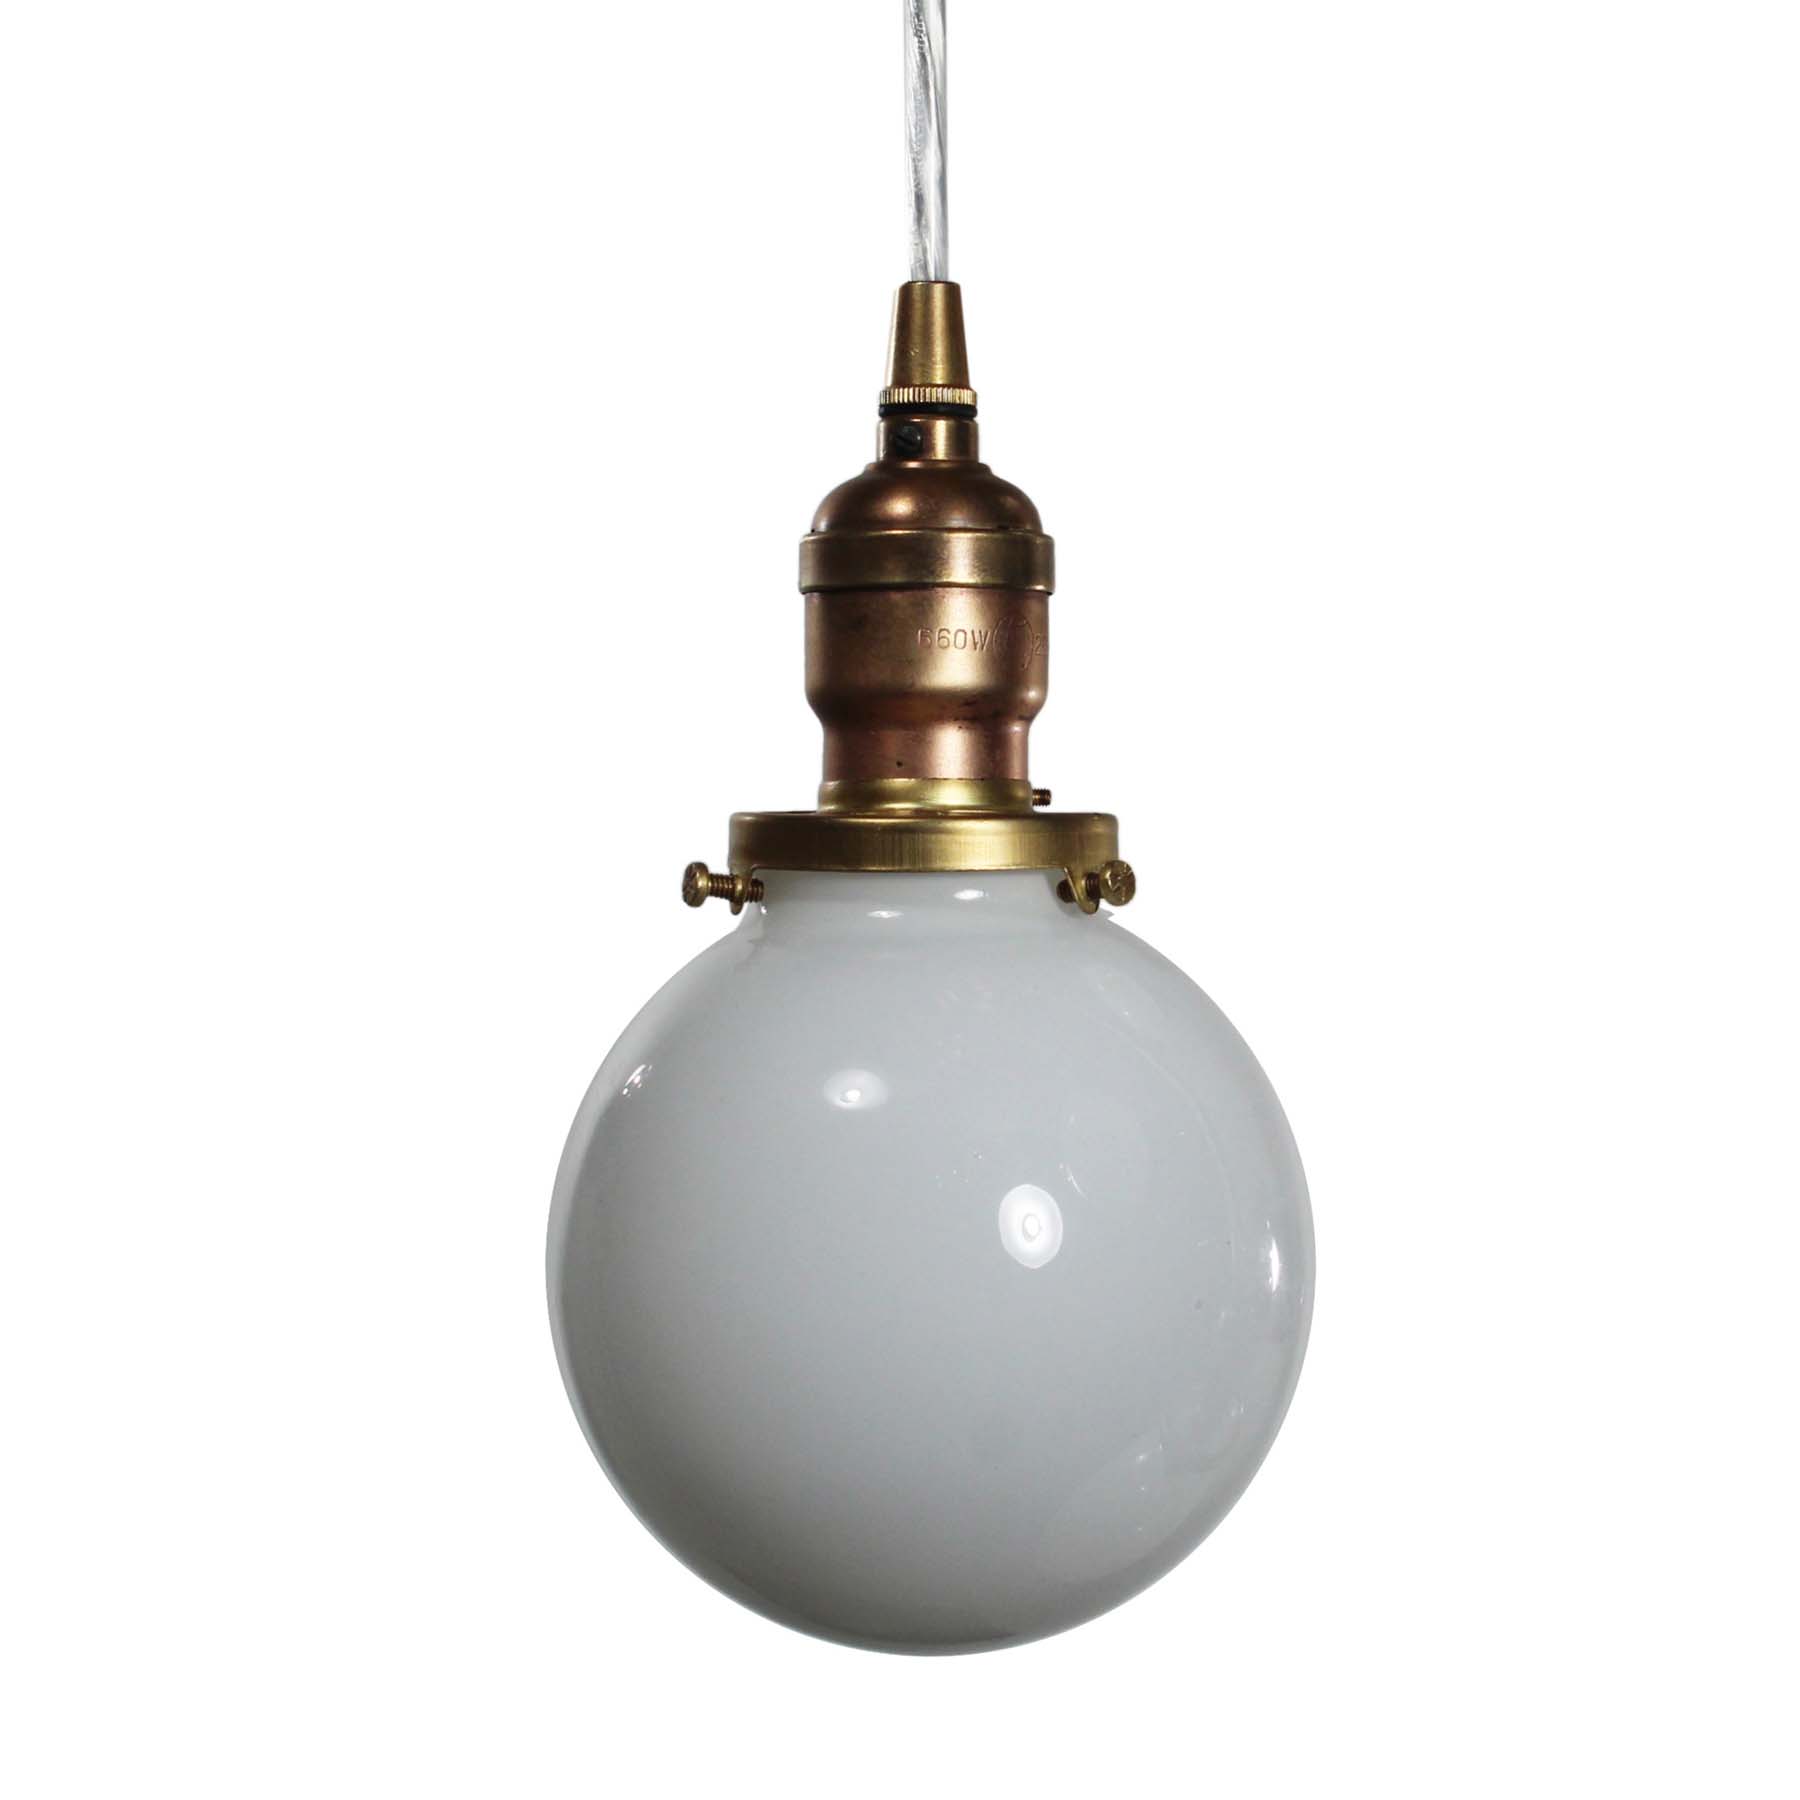 SOLD Semi Flush-Mount Chandelier with Ball Shades, Antique Lighting-70141